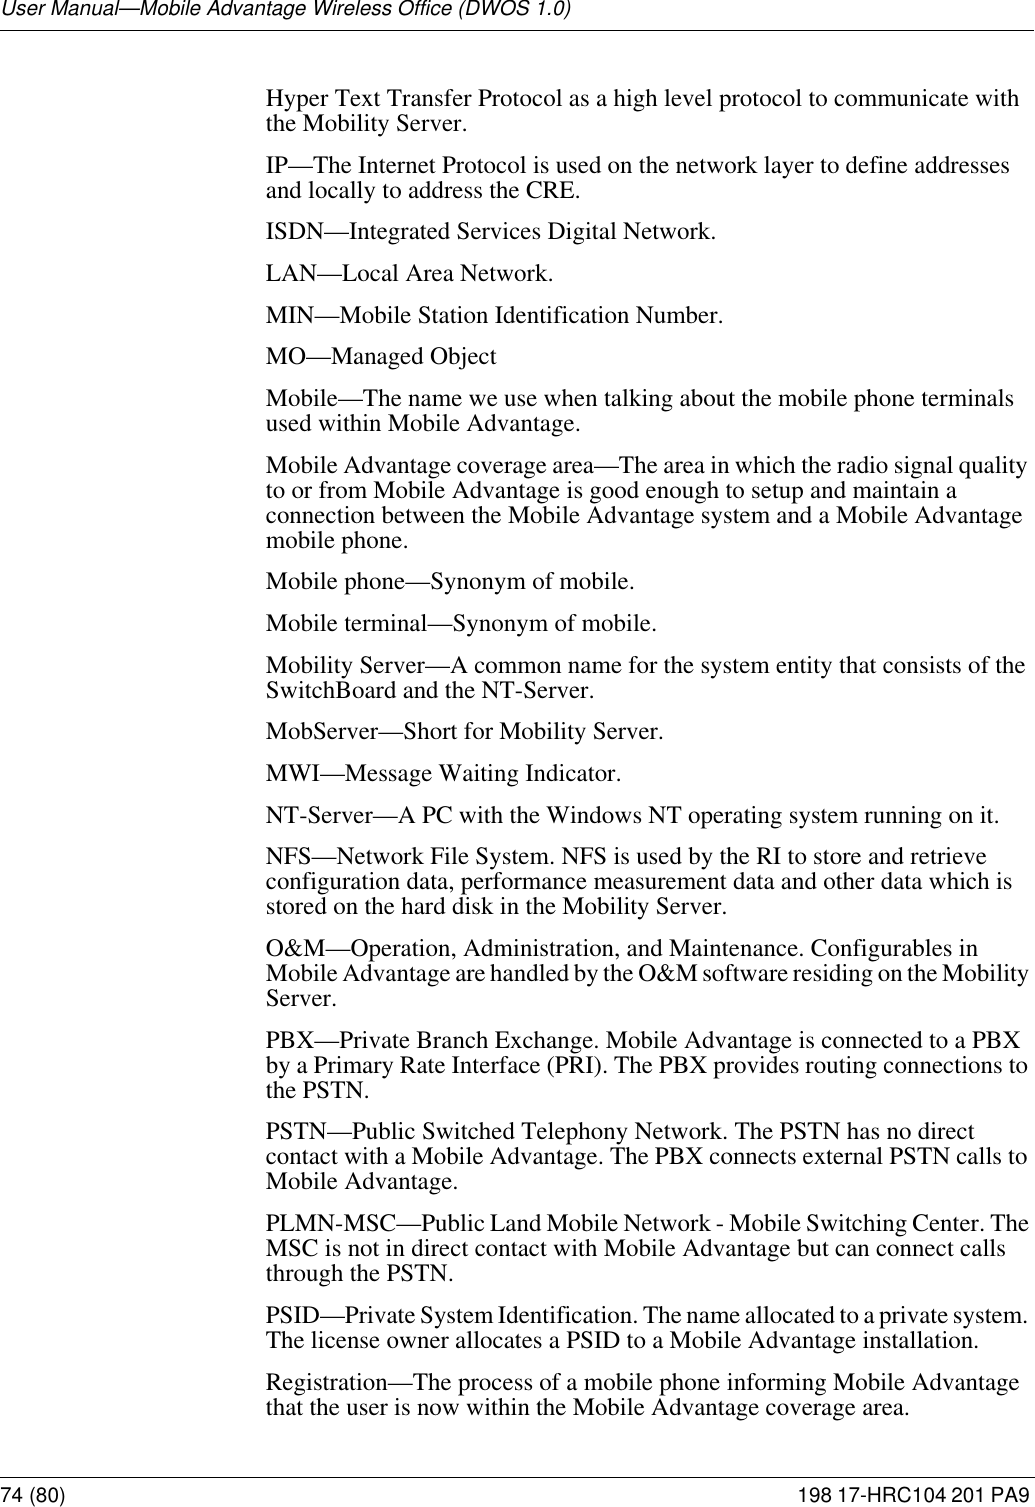 User Manual—Mobile Advantage Wireless Office (DWOS 1.0)74 (80) 198 17-HRC104 201 PA9 Hyper Text Transfer Protocol as a high level protocol to communicate with the Mobility Server. IP—The Internet Protocol is used on the network layer to define addresses and locally to address the CRE.ISDN—Integrated Services Digital Network. LAN—Local Area Network.MIN—Mobile Station Identification Number.MO—Managed ObjectMobile—The name we use when talking about the mobile phone terminals used within Mobile Advantage.Mobile Advantage coverage area—The area in which the radio signal quality to or from Mobile Advantage is good enough to setup and maintain a connection between the Mobile Advantage system and a Mobile Advantage mobile phone.Mobile phone—Synonym of mobile.Mobile terminal—Synonym of mobile.Mobility Server—A common name for the system entity that consists of the SwitchBoard and the NT-Server.MobServer—Short for Mobility Server.MWI—Message Waiting Indicator.NT-Server—A PC with the Windows NT operating system running on it. NFS—Network File System. NFS is used by the RI to store and retrieve configuration data, performance measurement data and other data which is stored on the hard disk in the Mobility Server.O&amp;M—Operation, Administration, and Maintenance. Configurables in Mobile Advantage are handled by the O&amp;M software residing on the Mobility Server.PBX—Private Branch Exchange. Mobile Advantage is connected to a PBX by a Primary Rate Interface (PRI). The PBX provides routing connections to the PSTN.PSTN—Public Switched Telephony Network. The PSTN has no direct contact with a Mobile Advantage. The PBX connects external PSTN calls to Mobile Advantage.PLMN-MSC—Public Land Mobile Network - Mobile Switching Center. The MSC is not in direct contact with Mobile Advantage but can connect calls through the PSTN.PSID—Private System Identification. The name allocated to a private system. The license owner allocates a PSID to a Mobile Advantage installation.Registration—The process of a mobile phone informing Mobile Advantage that the user is now within the Mobile Advantage coverage area.